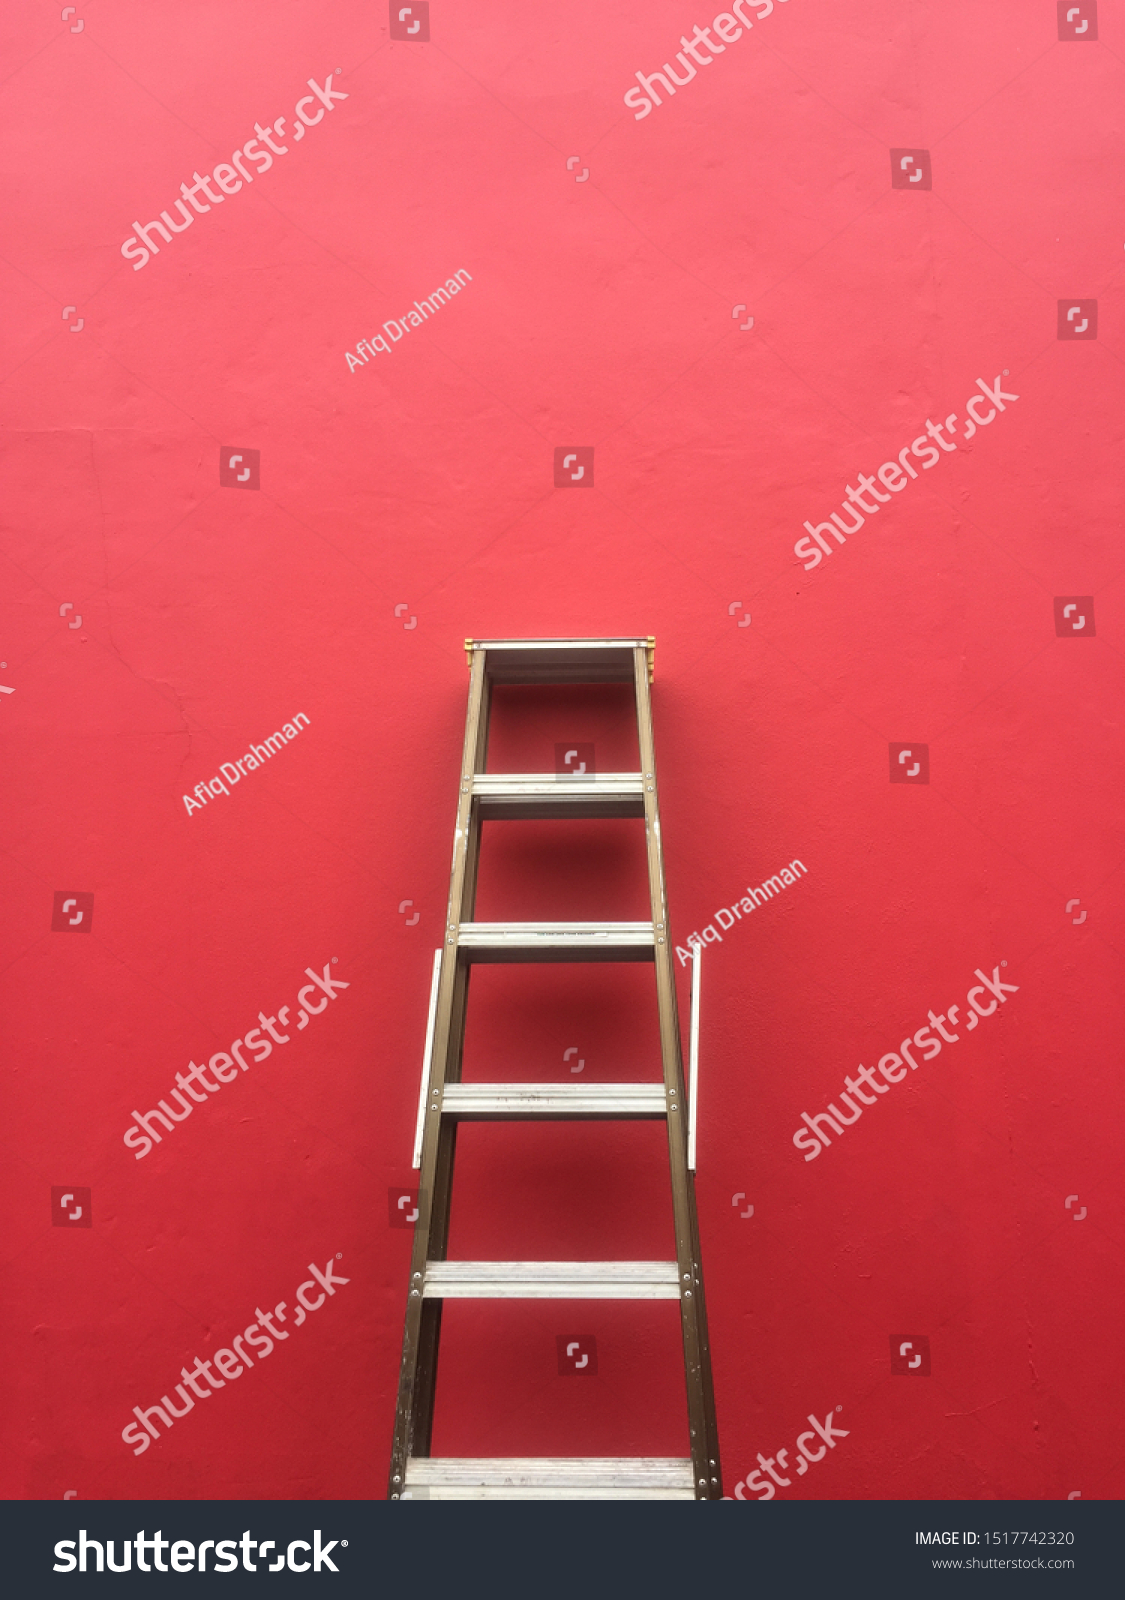 Ladder Aesthetic Red Background Stock Photo Edit Now 1517742320